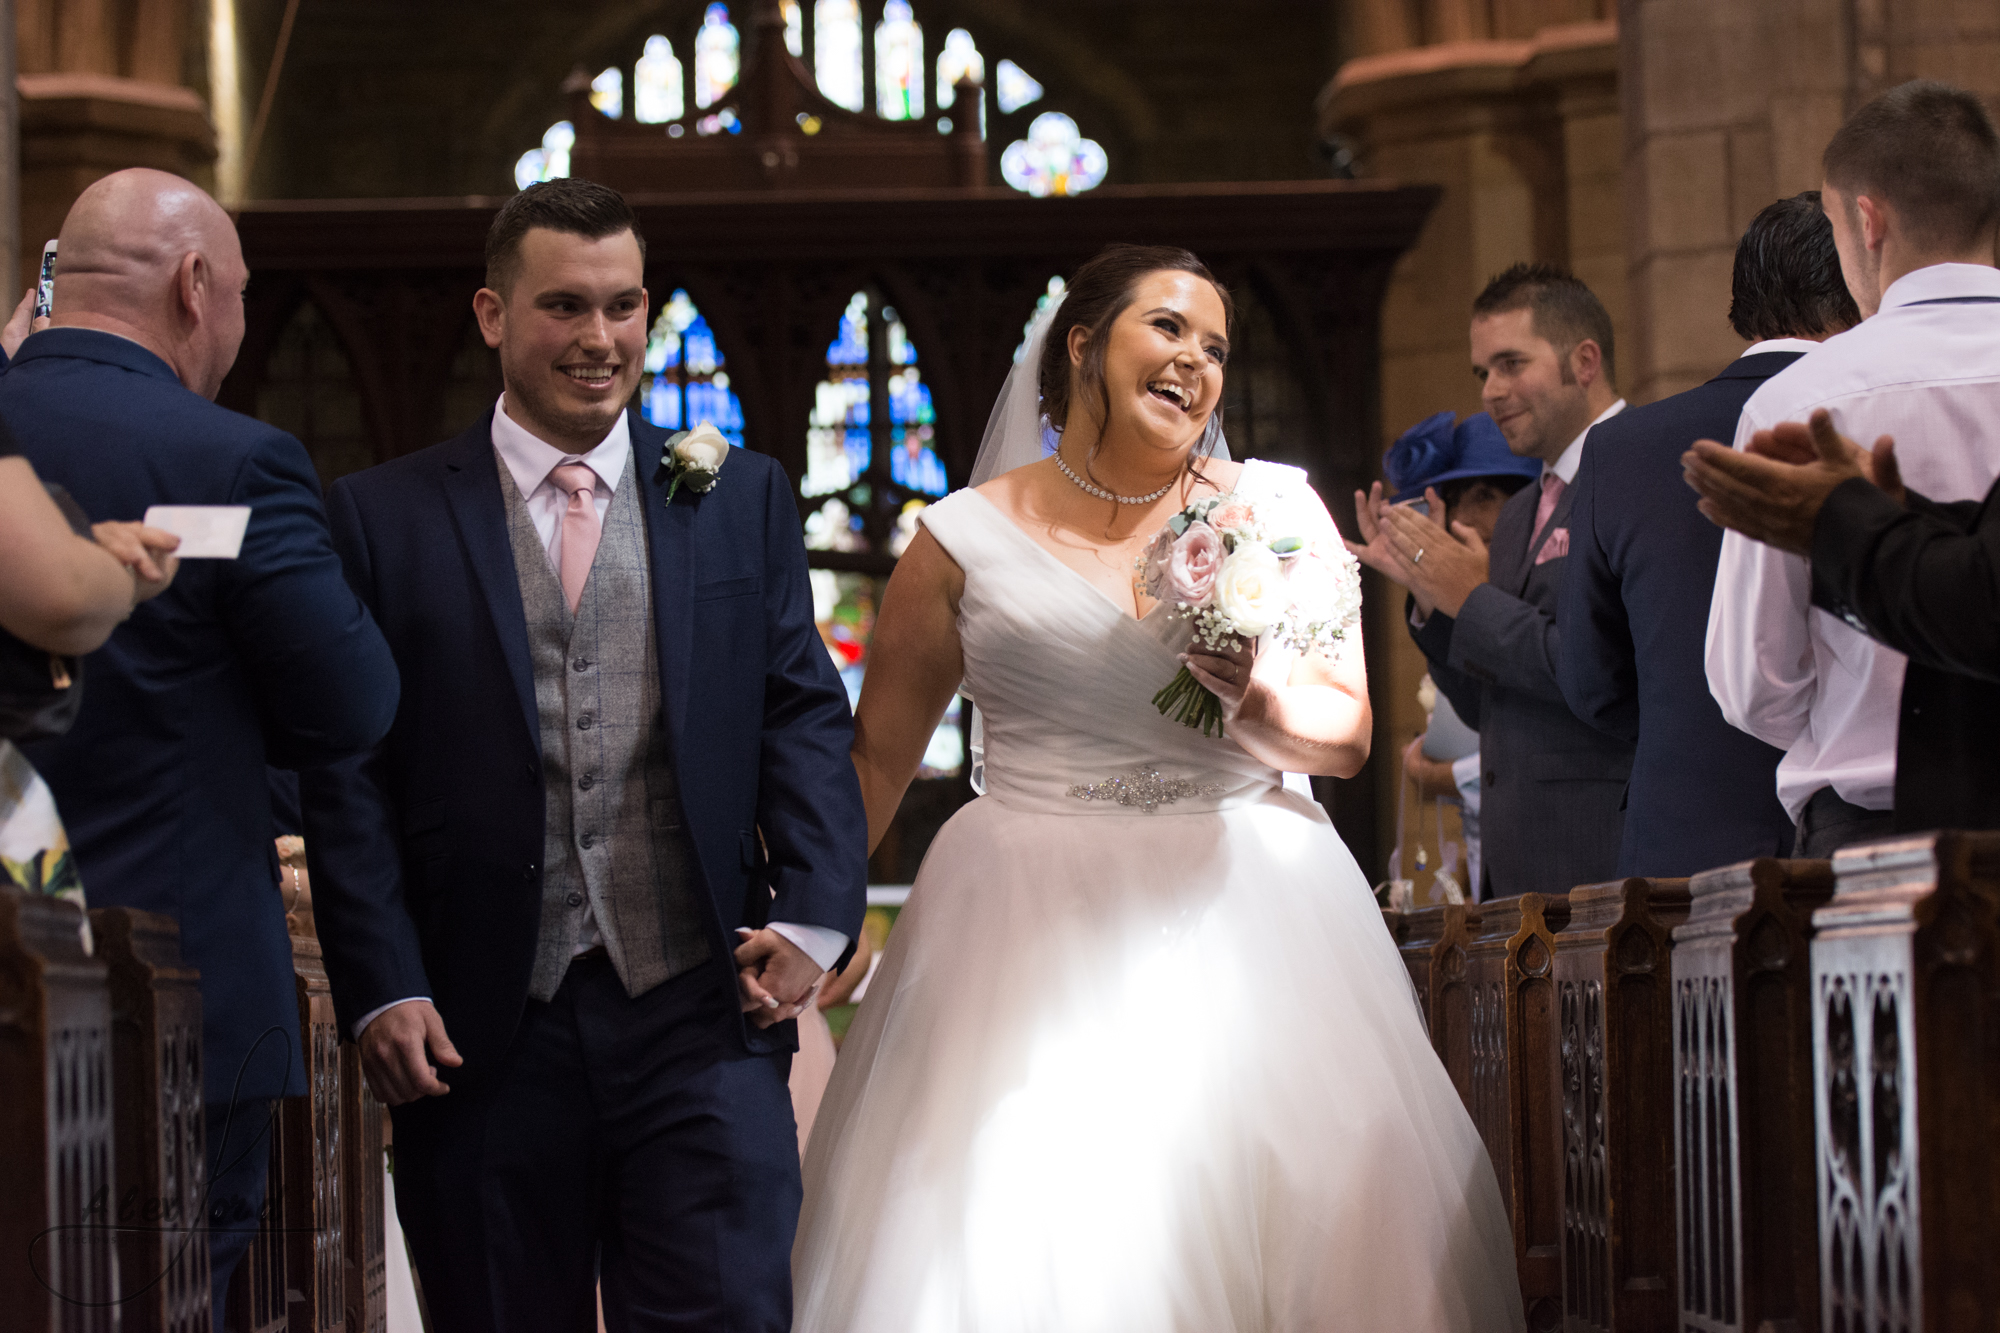 The bride and groom exit the church together with big smiles on their faces, straight after their wedding service